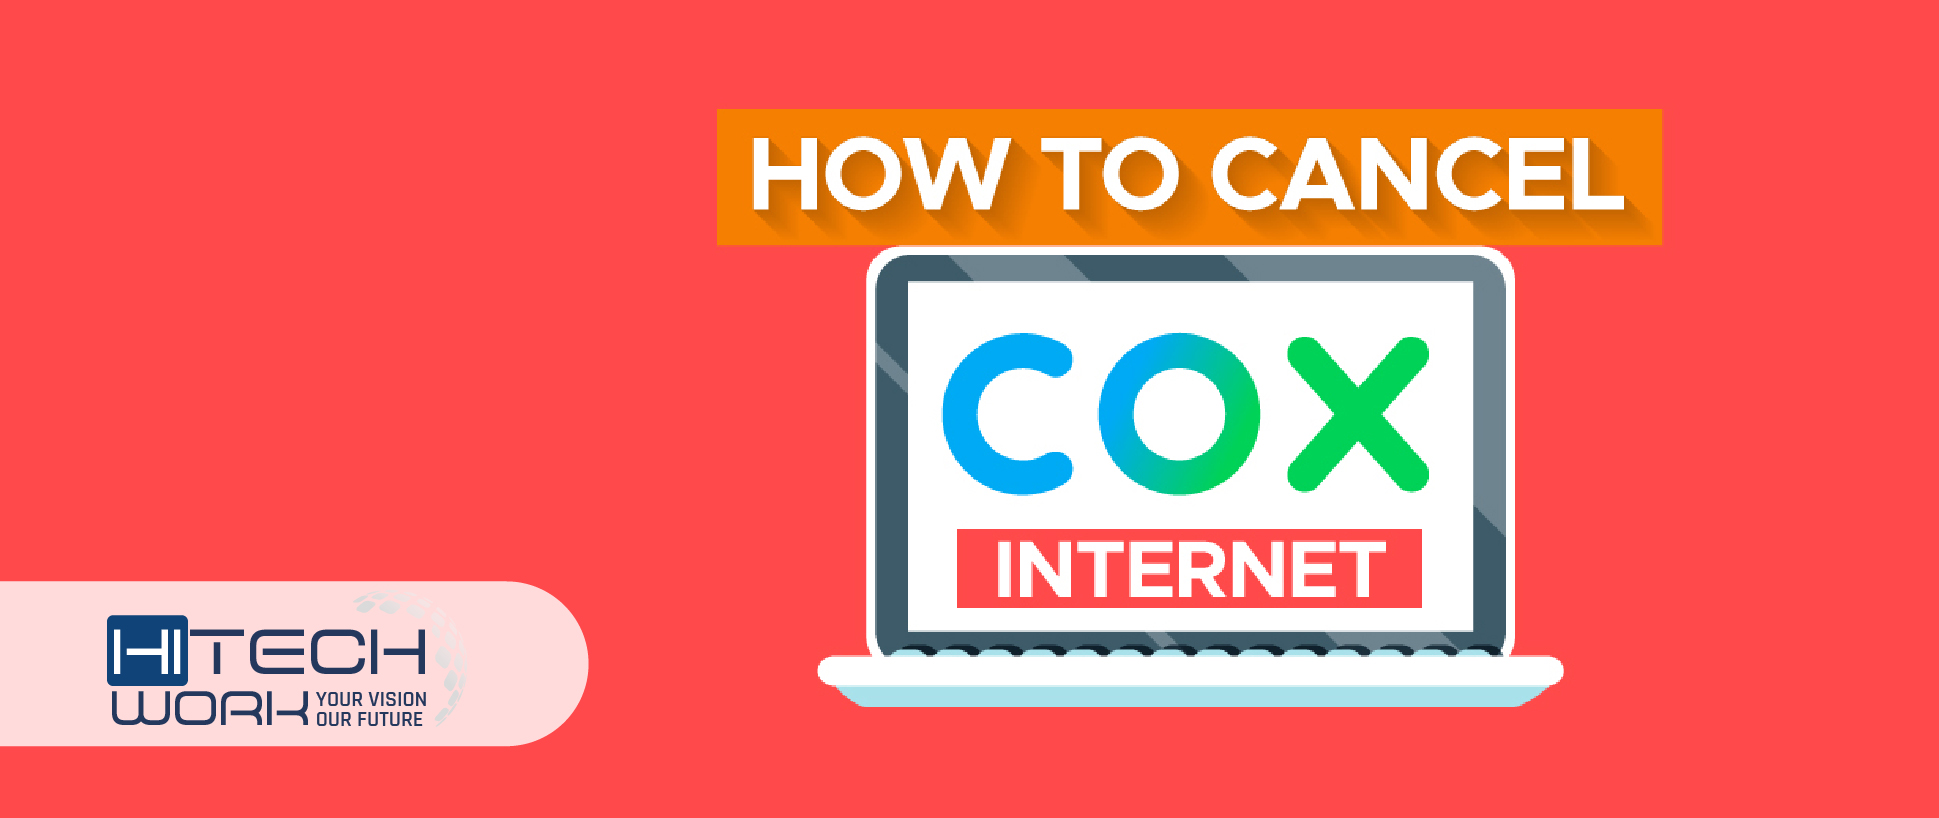 how to cancel cox internet